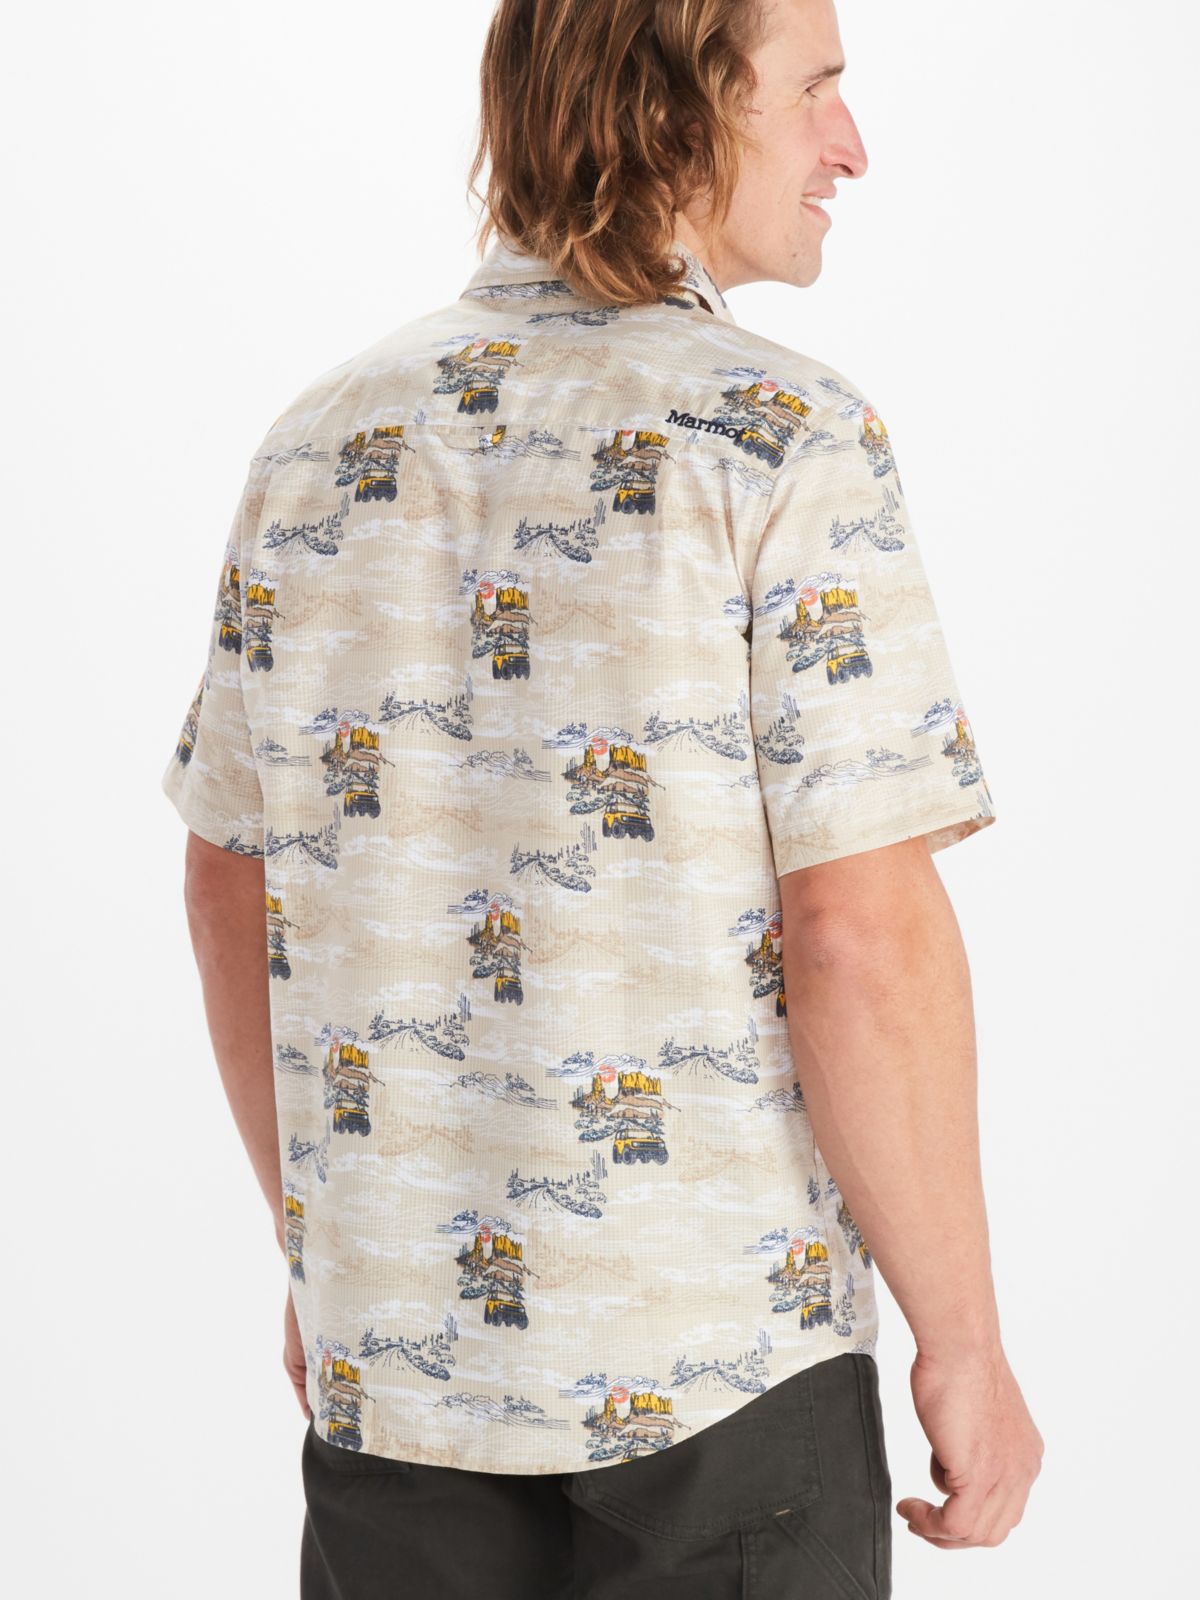 Marmot short sleeve shirt with outdoor graphic